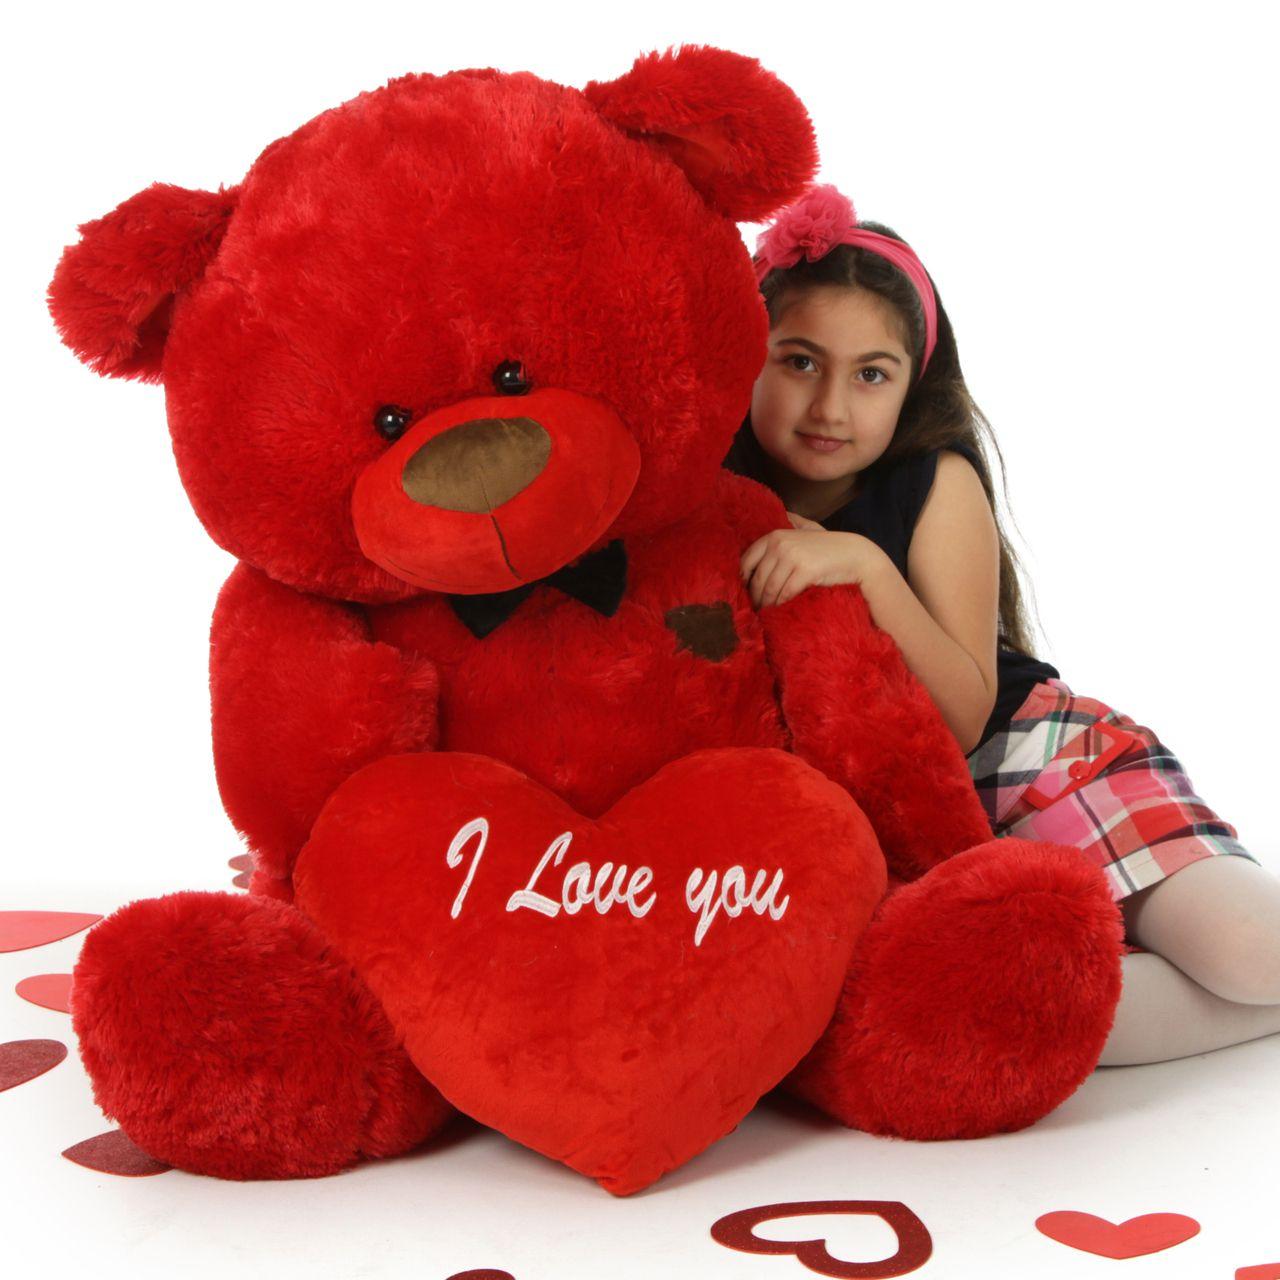 Red and Bear w Logo - Big Red Valentine's Teddy Bear with bow tie and plush I Love You